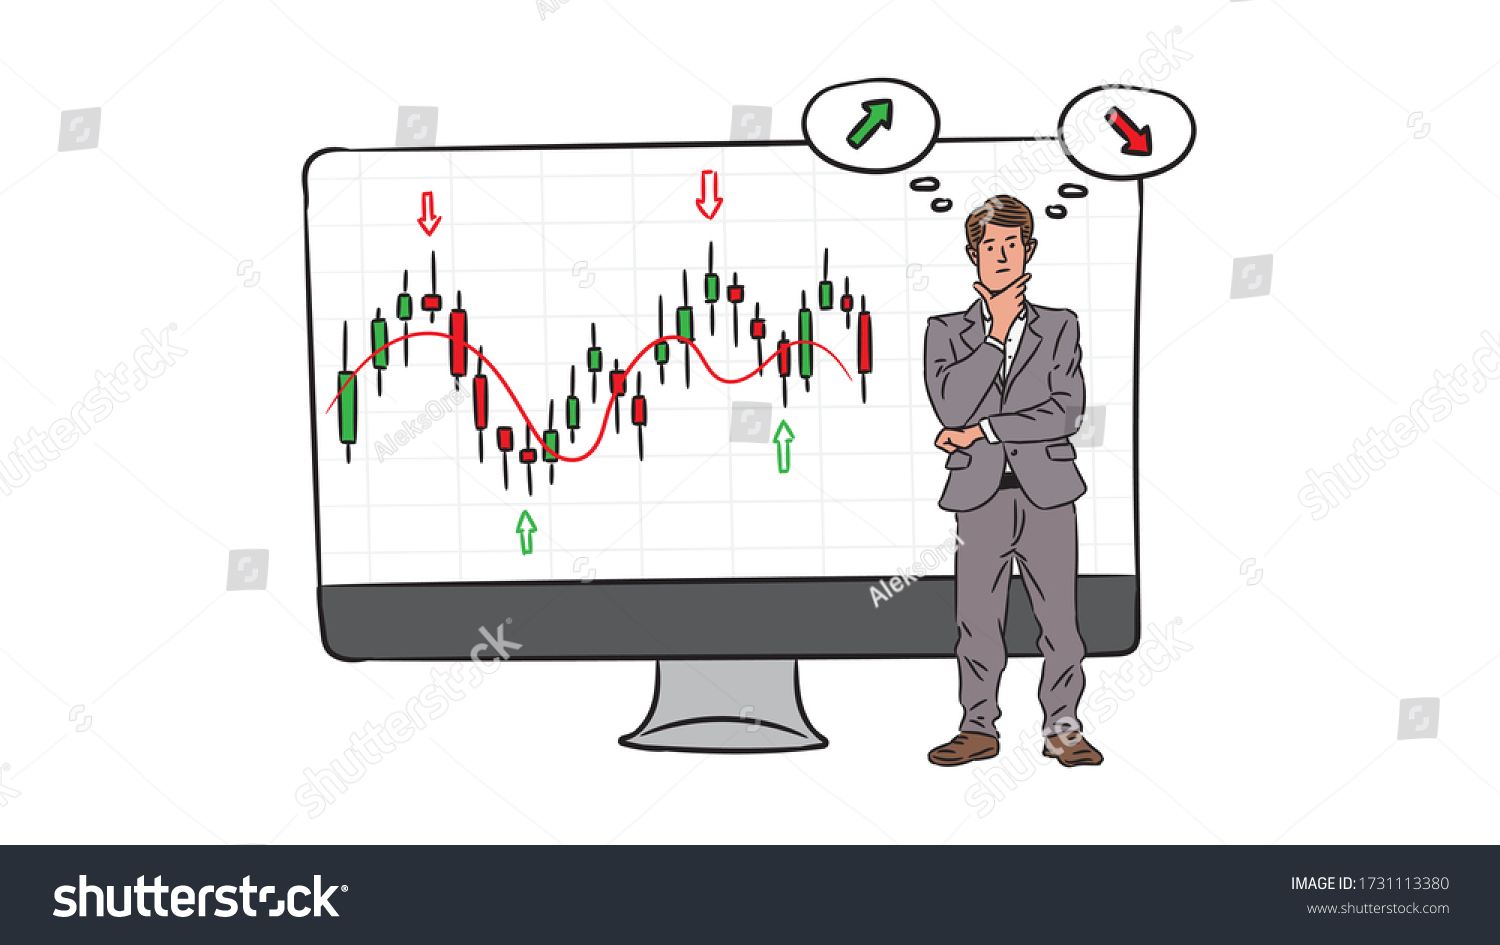 SVG of Investor thinks about stock market chart trend vector illustration. Desktop with financial market graph with and trader (investor) graphic design.
 svg